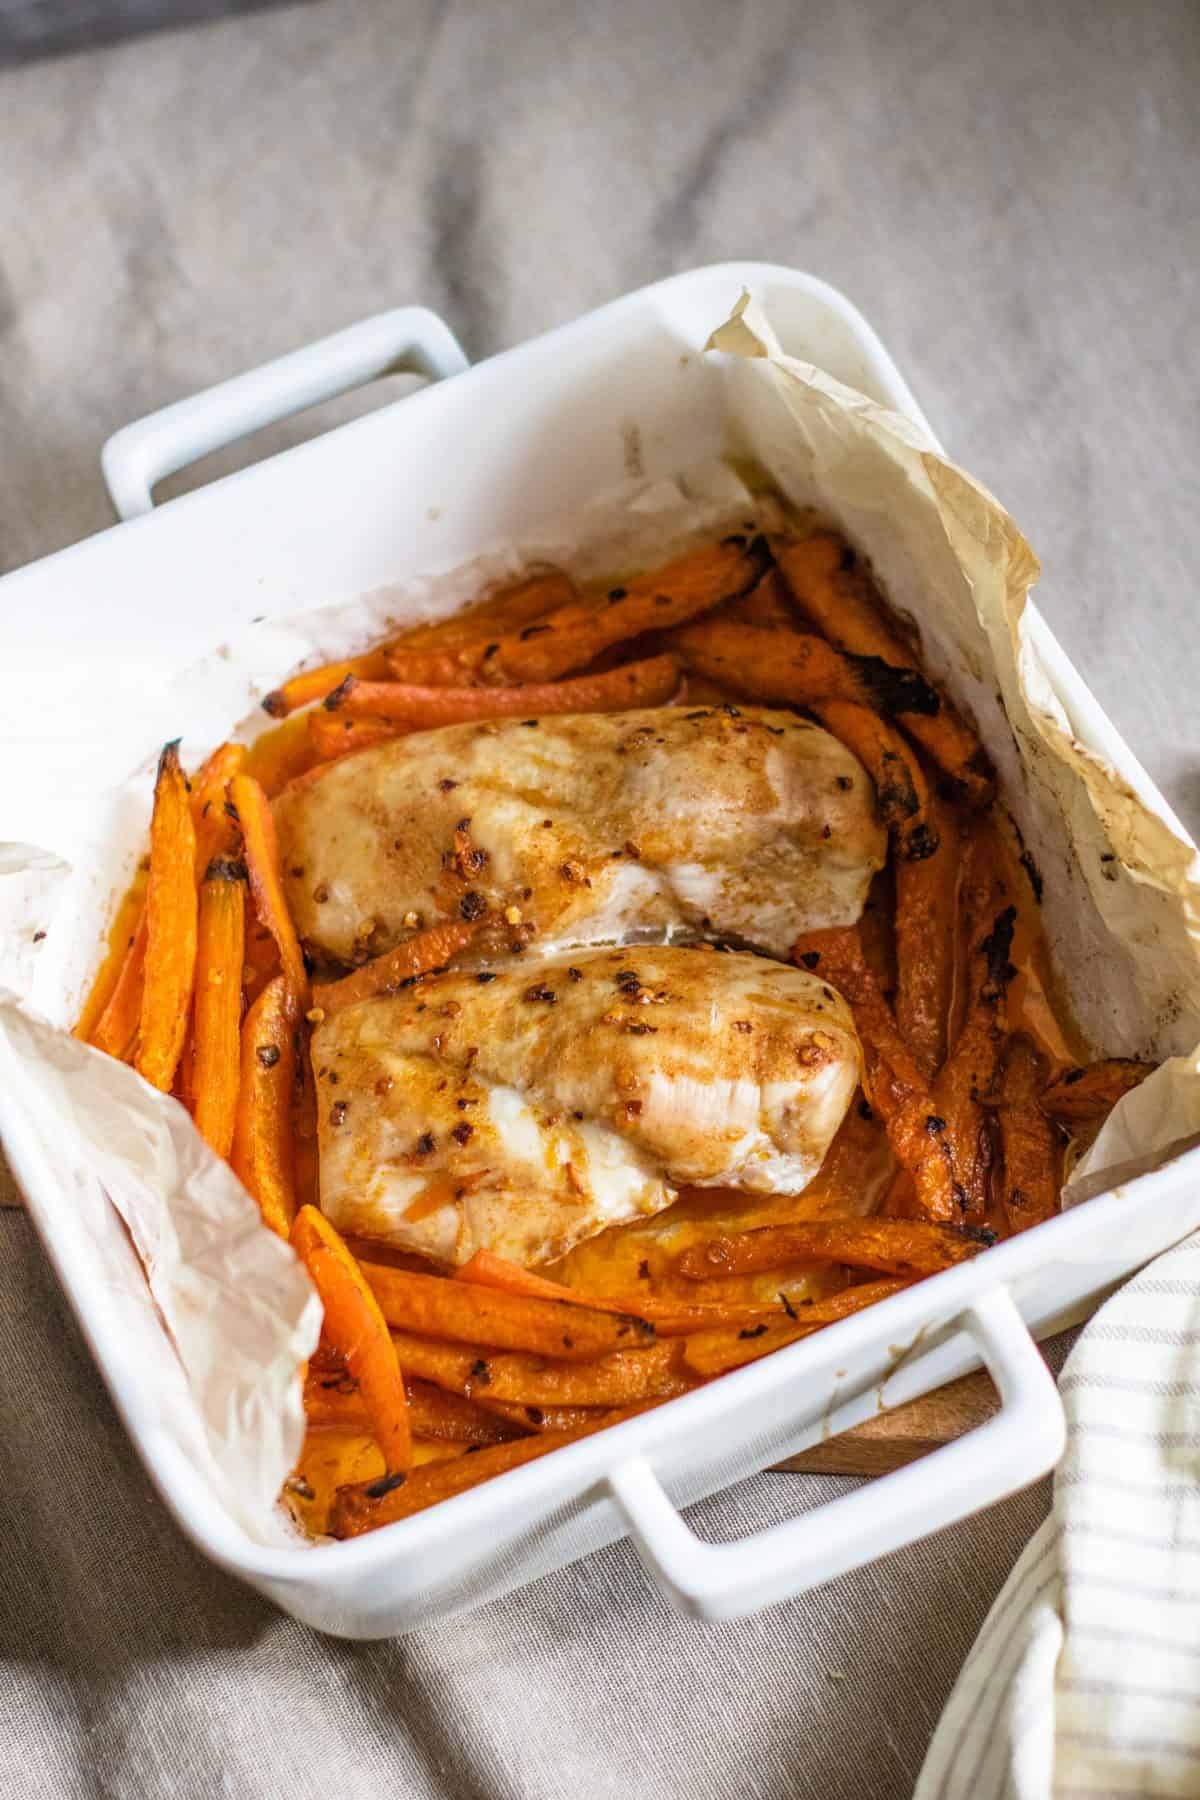 Chicken breasts and sliced carrots baked to perfection in an oven dish